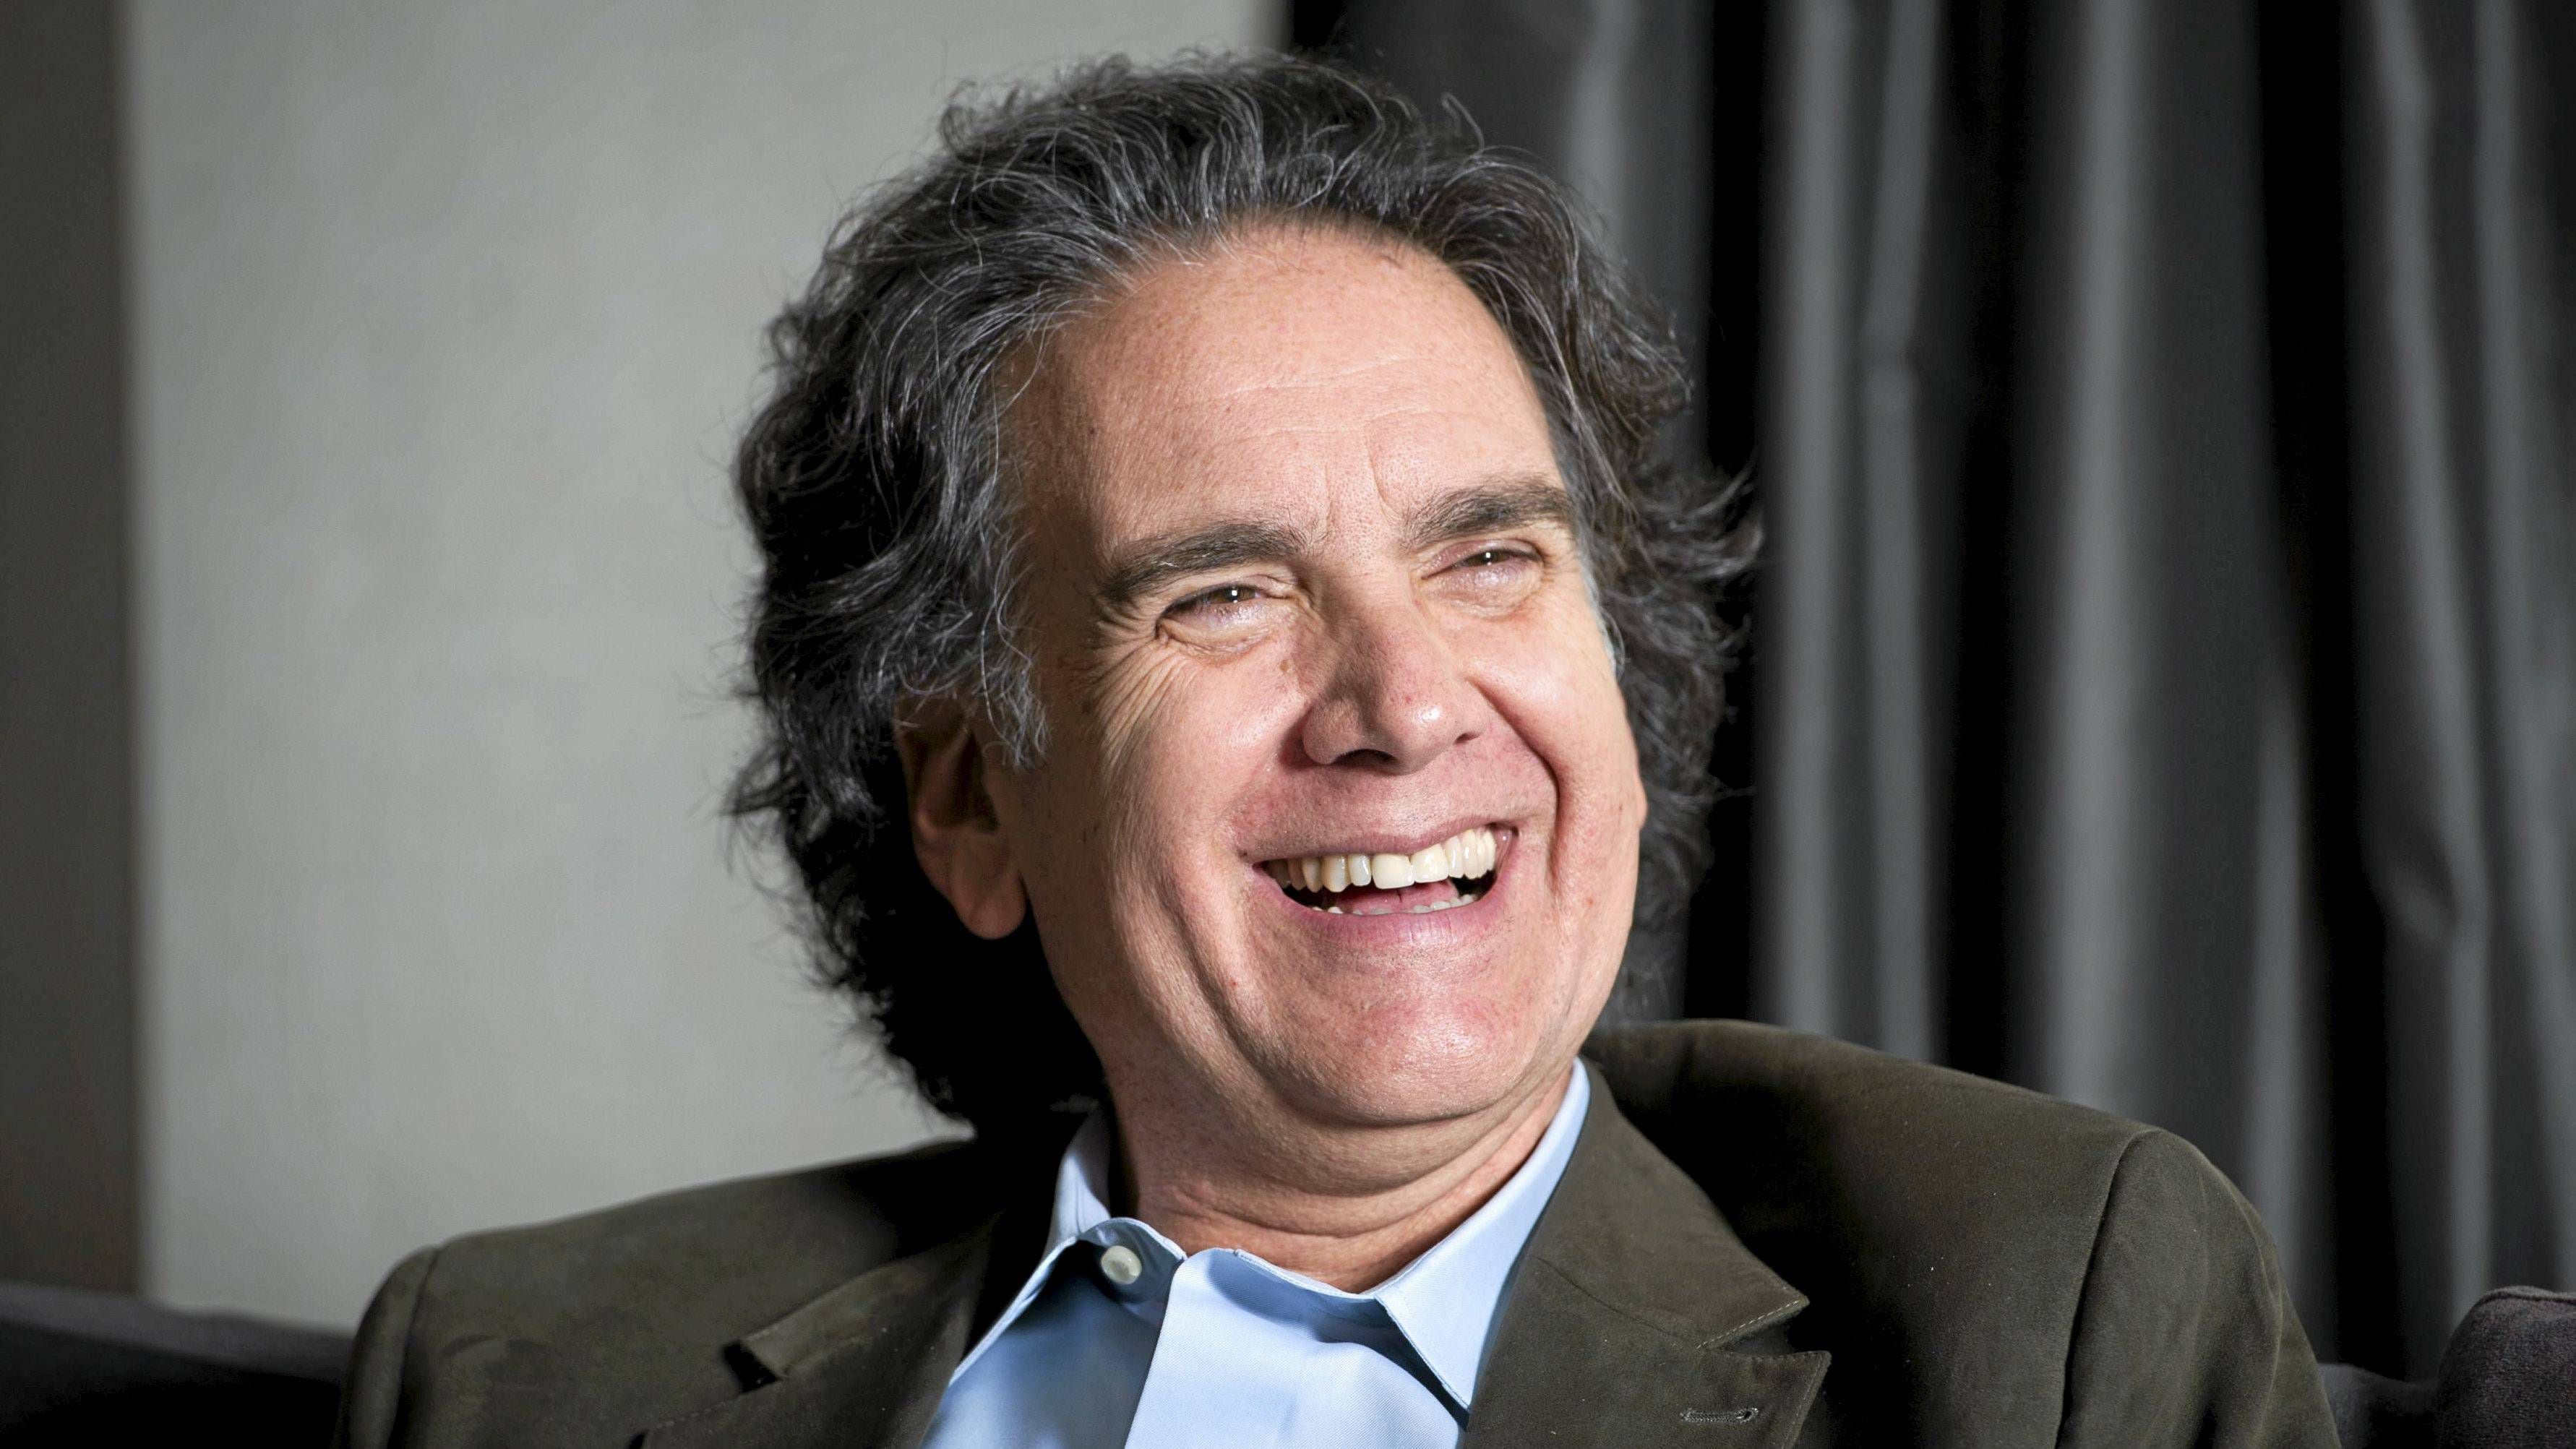 Peter Buffett's rich life doesn't come from family wealth - The Globe and Mail